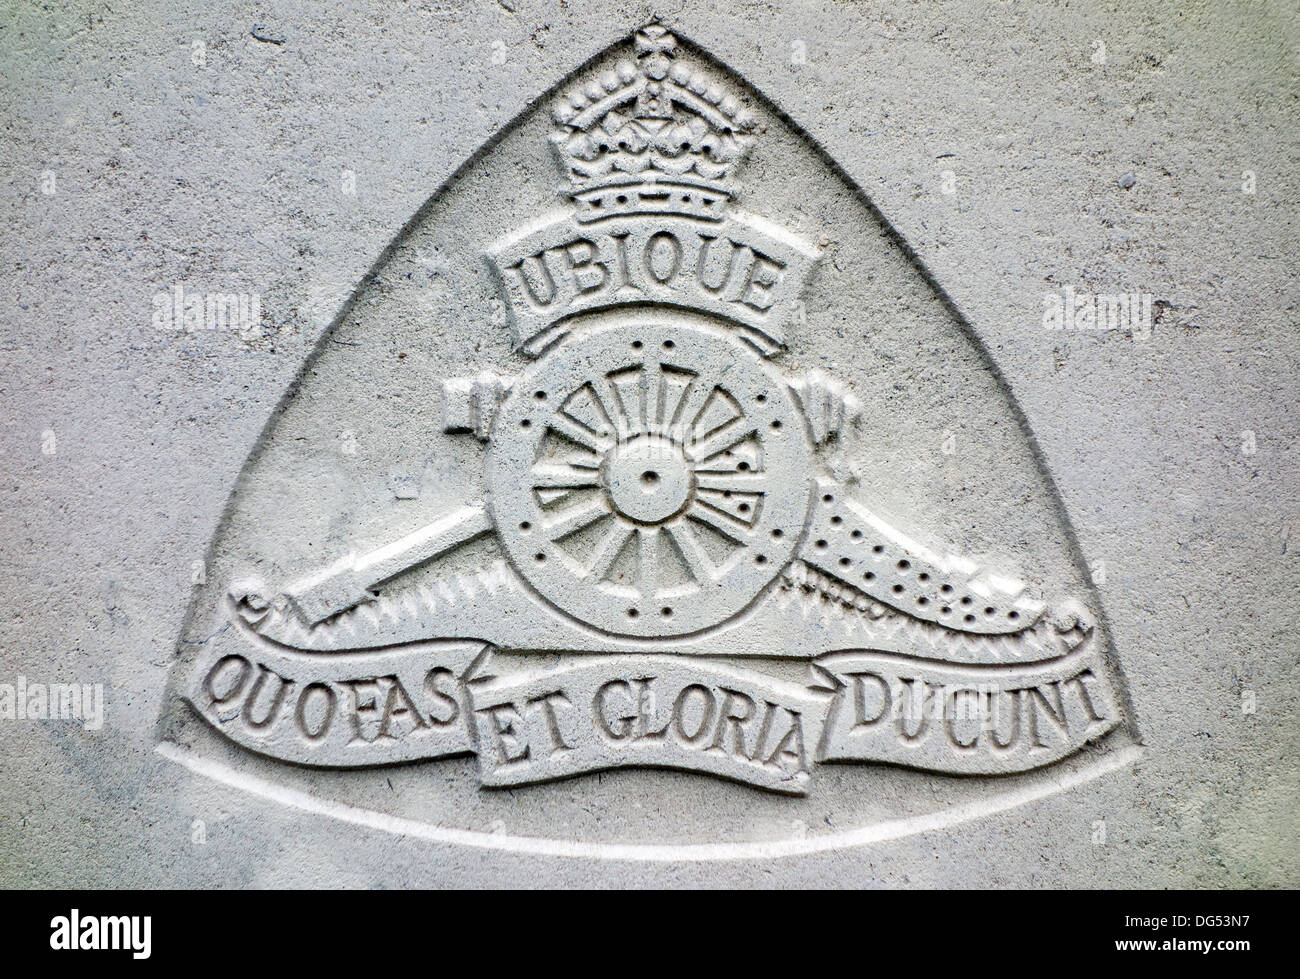 Royal Field Artillery regimental badge on headstone of World War One soldier, Cemetery of the Commonwealth War Graves Commission Stock Photo